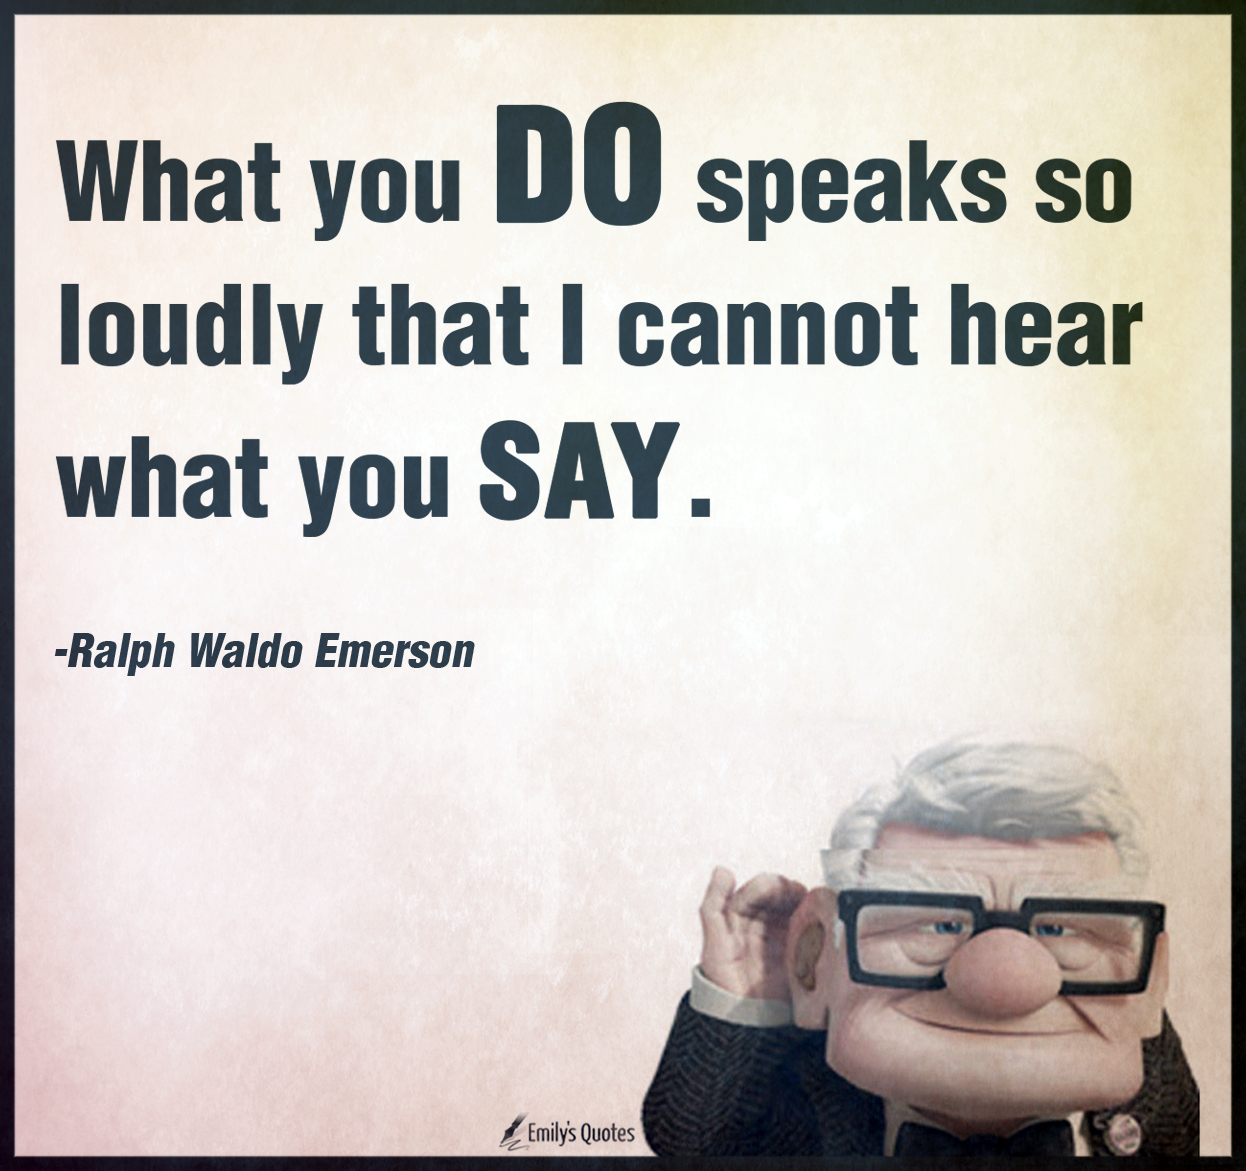 What you do speaks so loudly that I cannot hear what you say | Popular